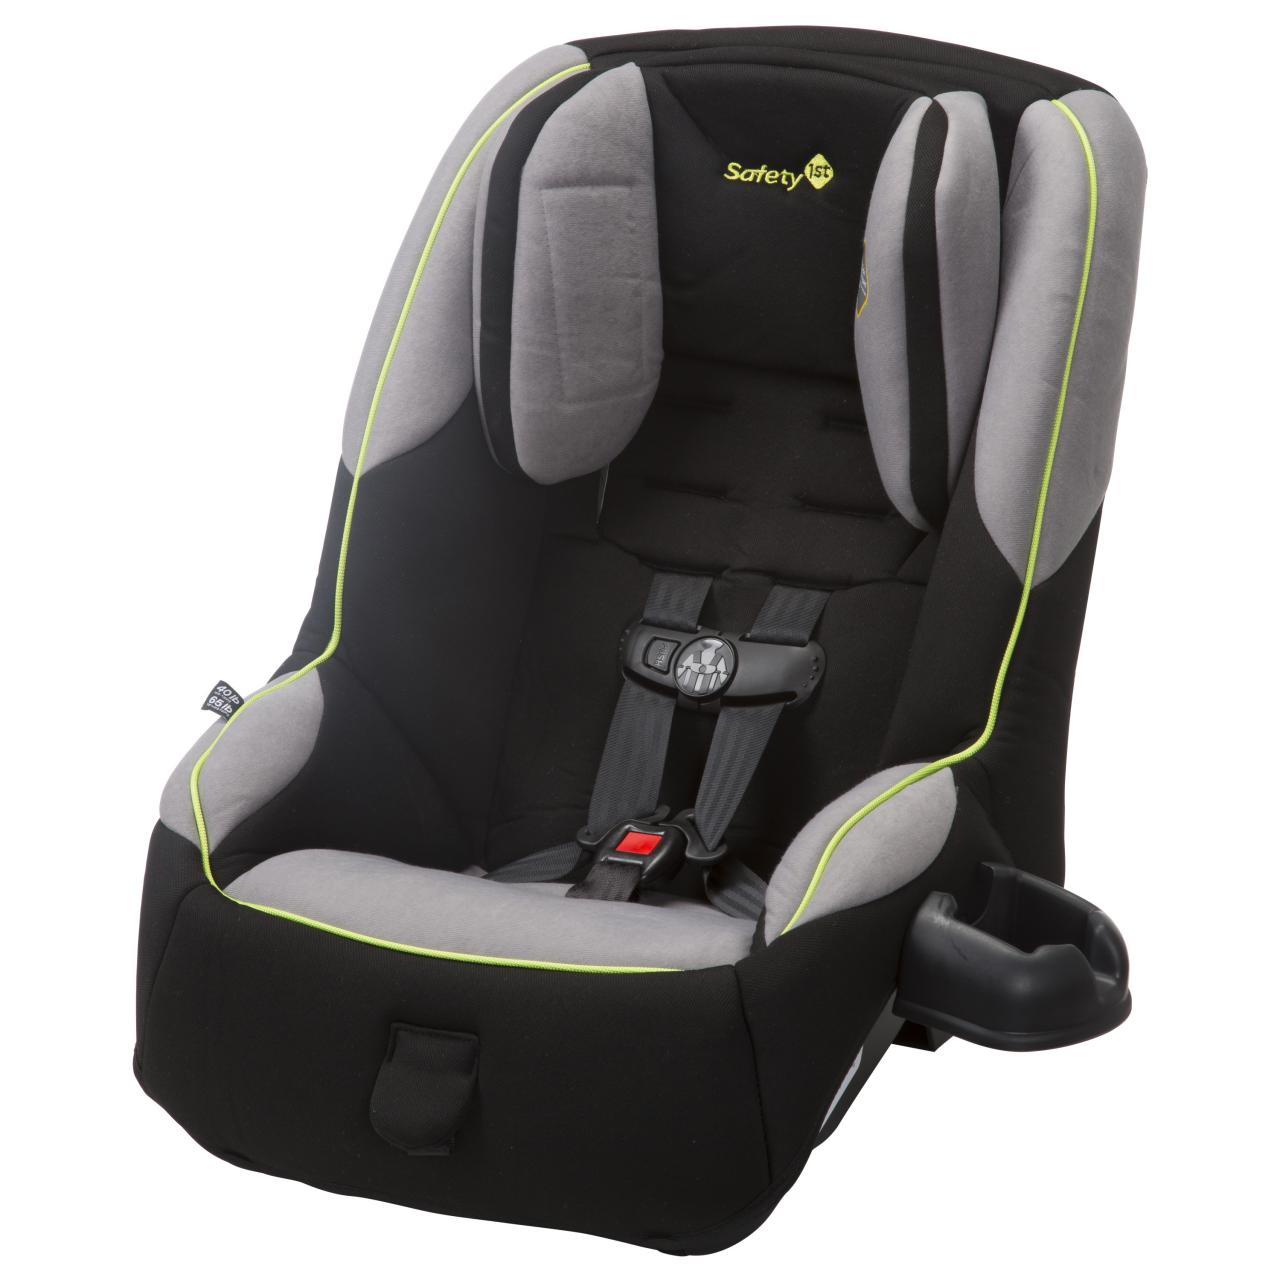 Safety 1st Guide 65 Convertible Car Seat Review - Thrifty Nifty Mommy